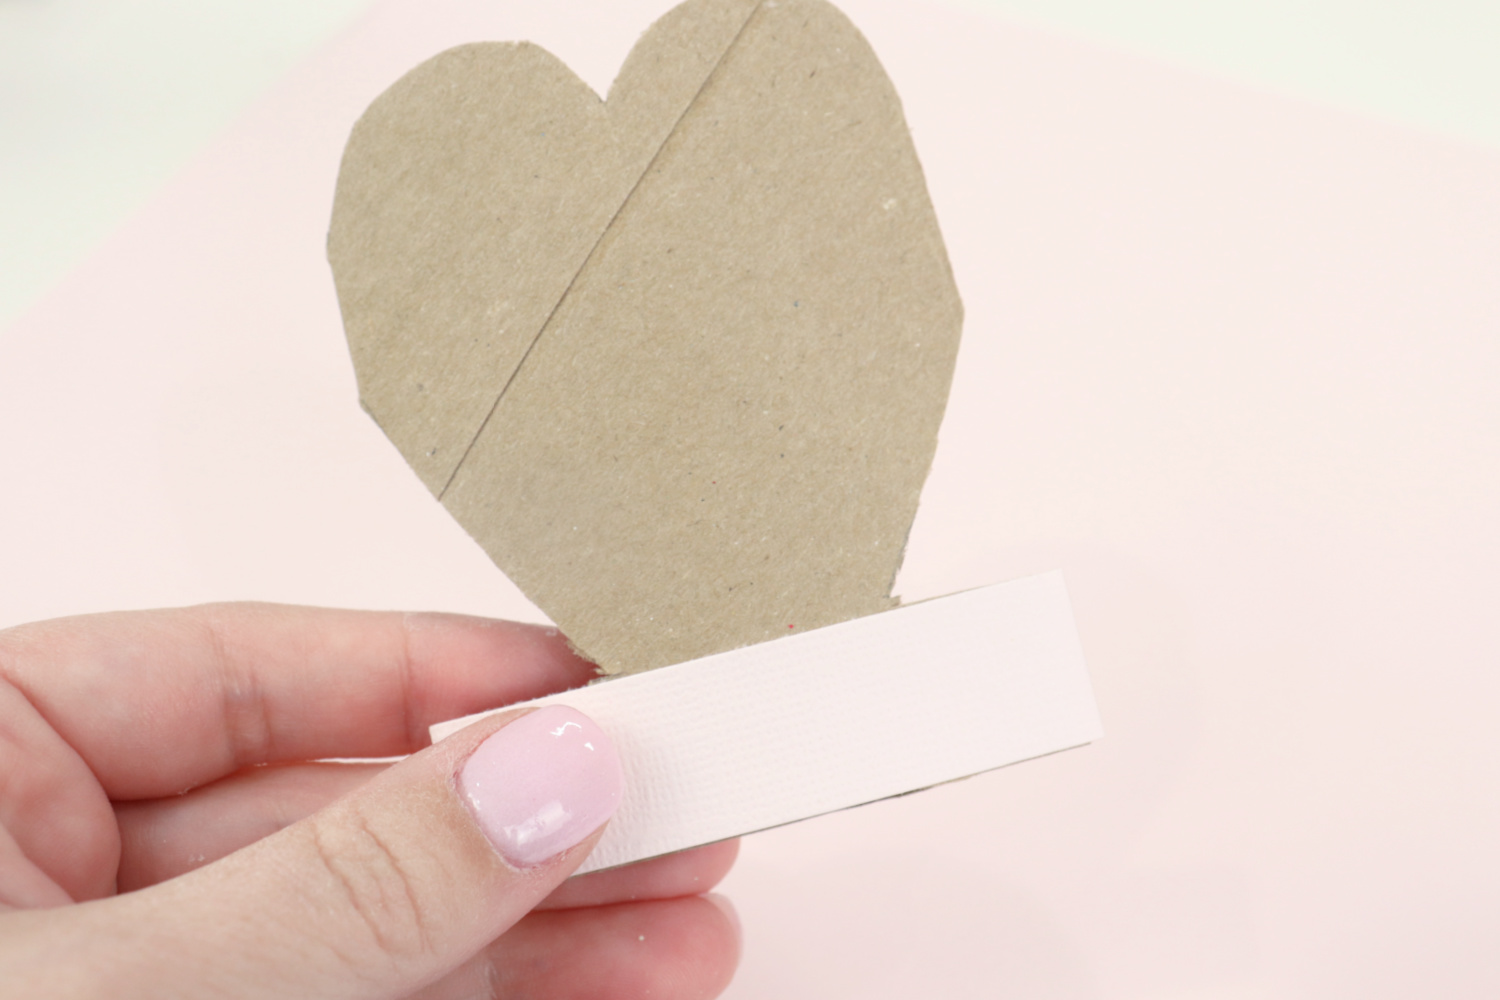 Image contains Amy’s hand holding a toilet paper roll cut into a heart shape with pink cardstock wrapped around the bottom.